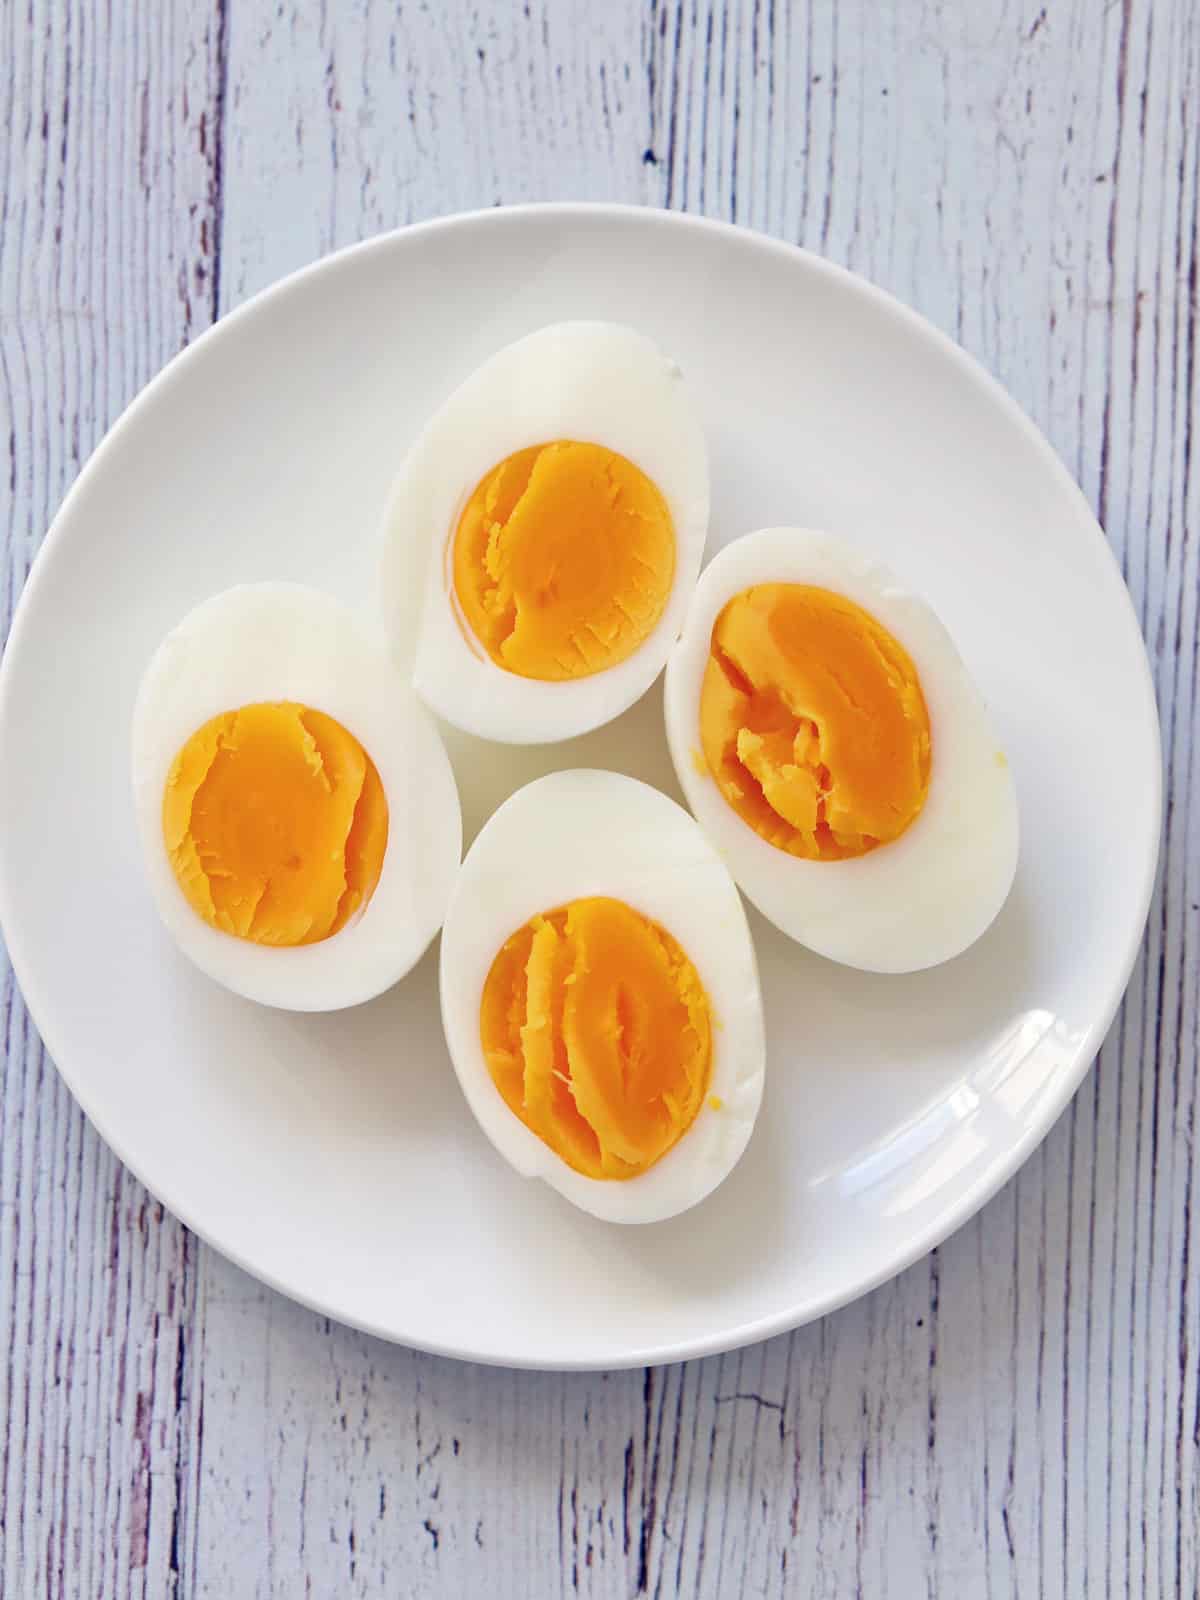 Hard-boiled eggs on a white plate.